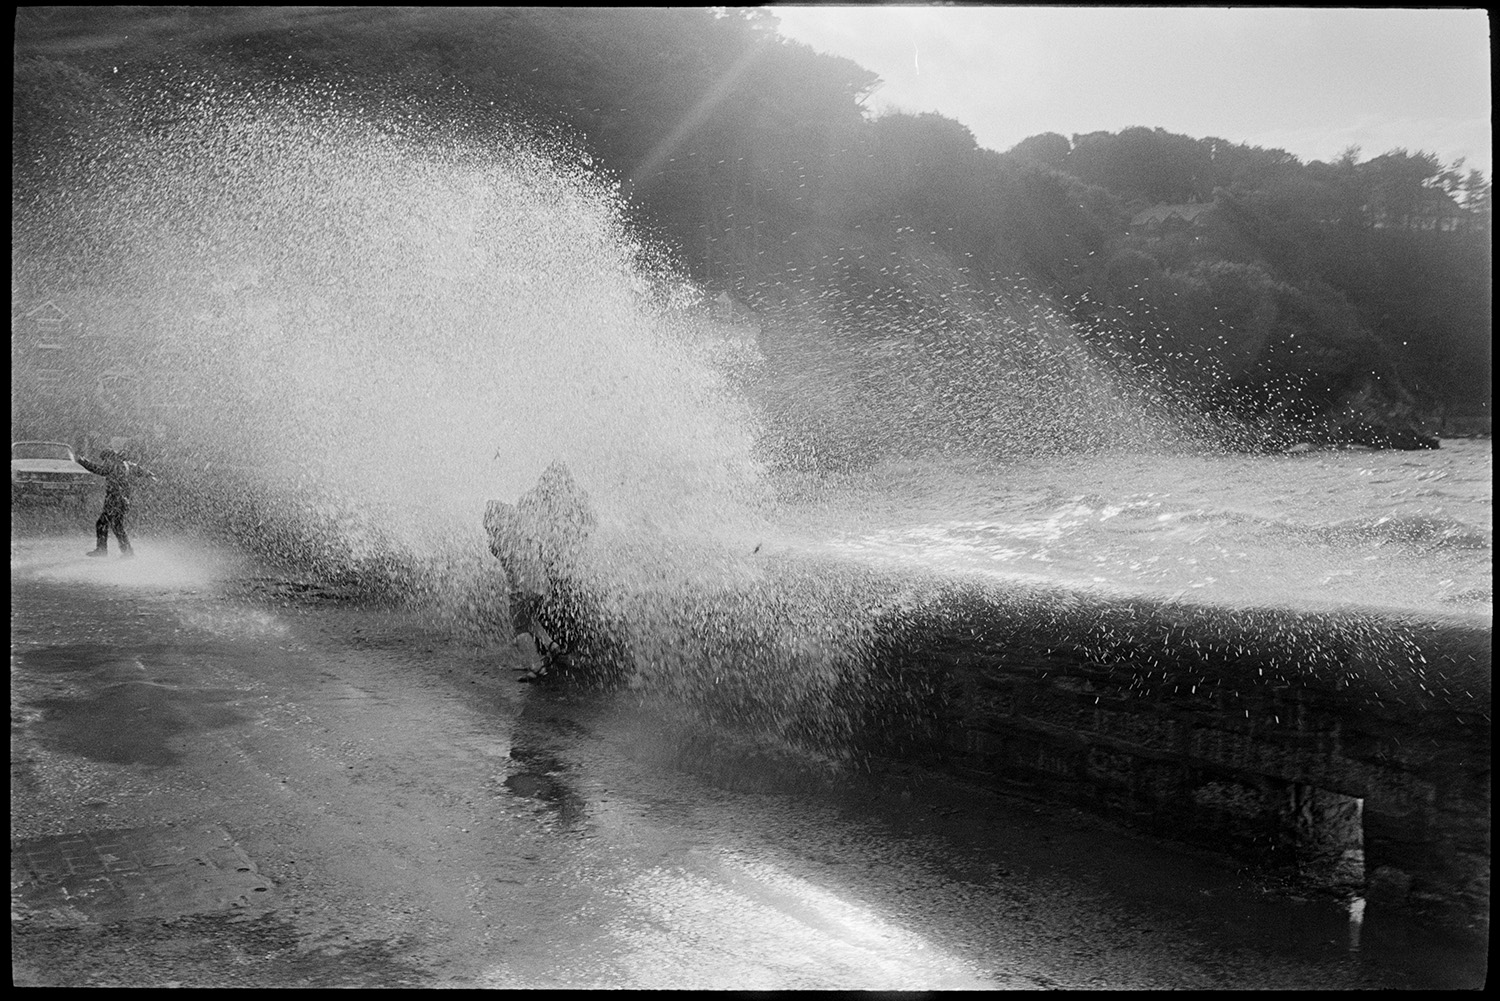 Holidaymakers watching rough seas breaking over sea wall.
[A wave breaking over the sea wall at Lee Bay. People and a car are being splashed by the wave. Wooded cliffs are visible in the background.]